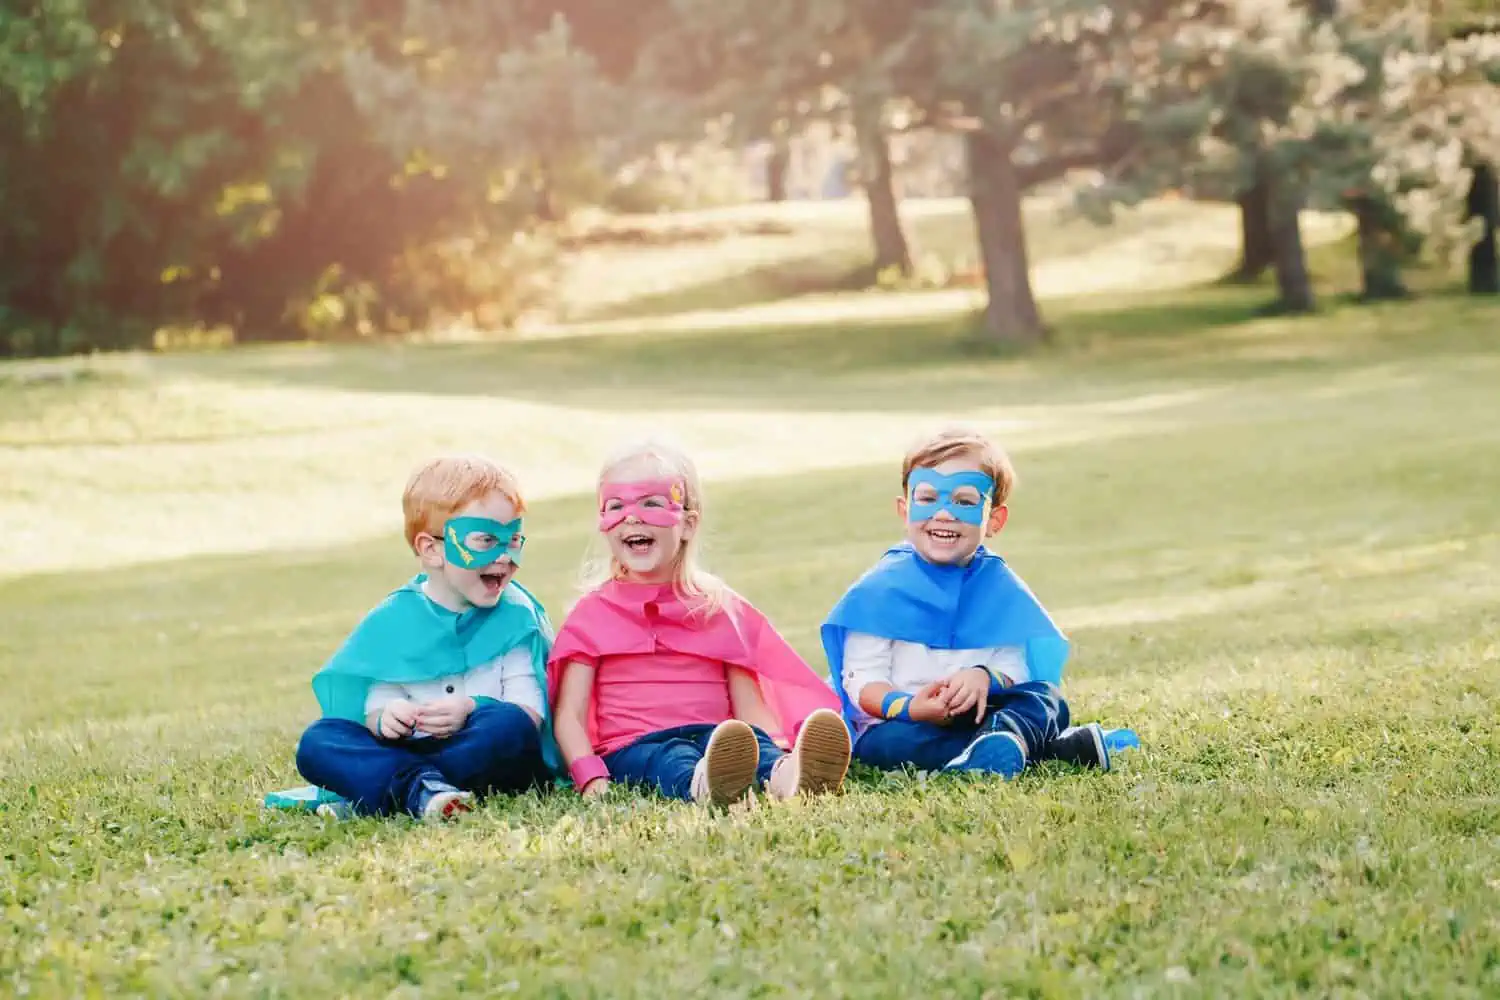 Adorable preschool children playing superheroes in the park